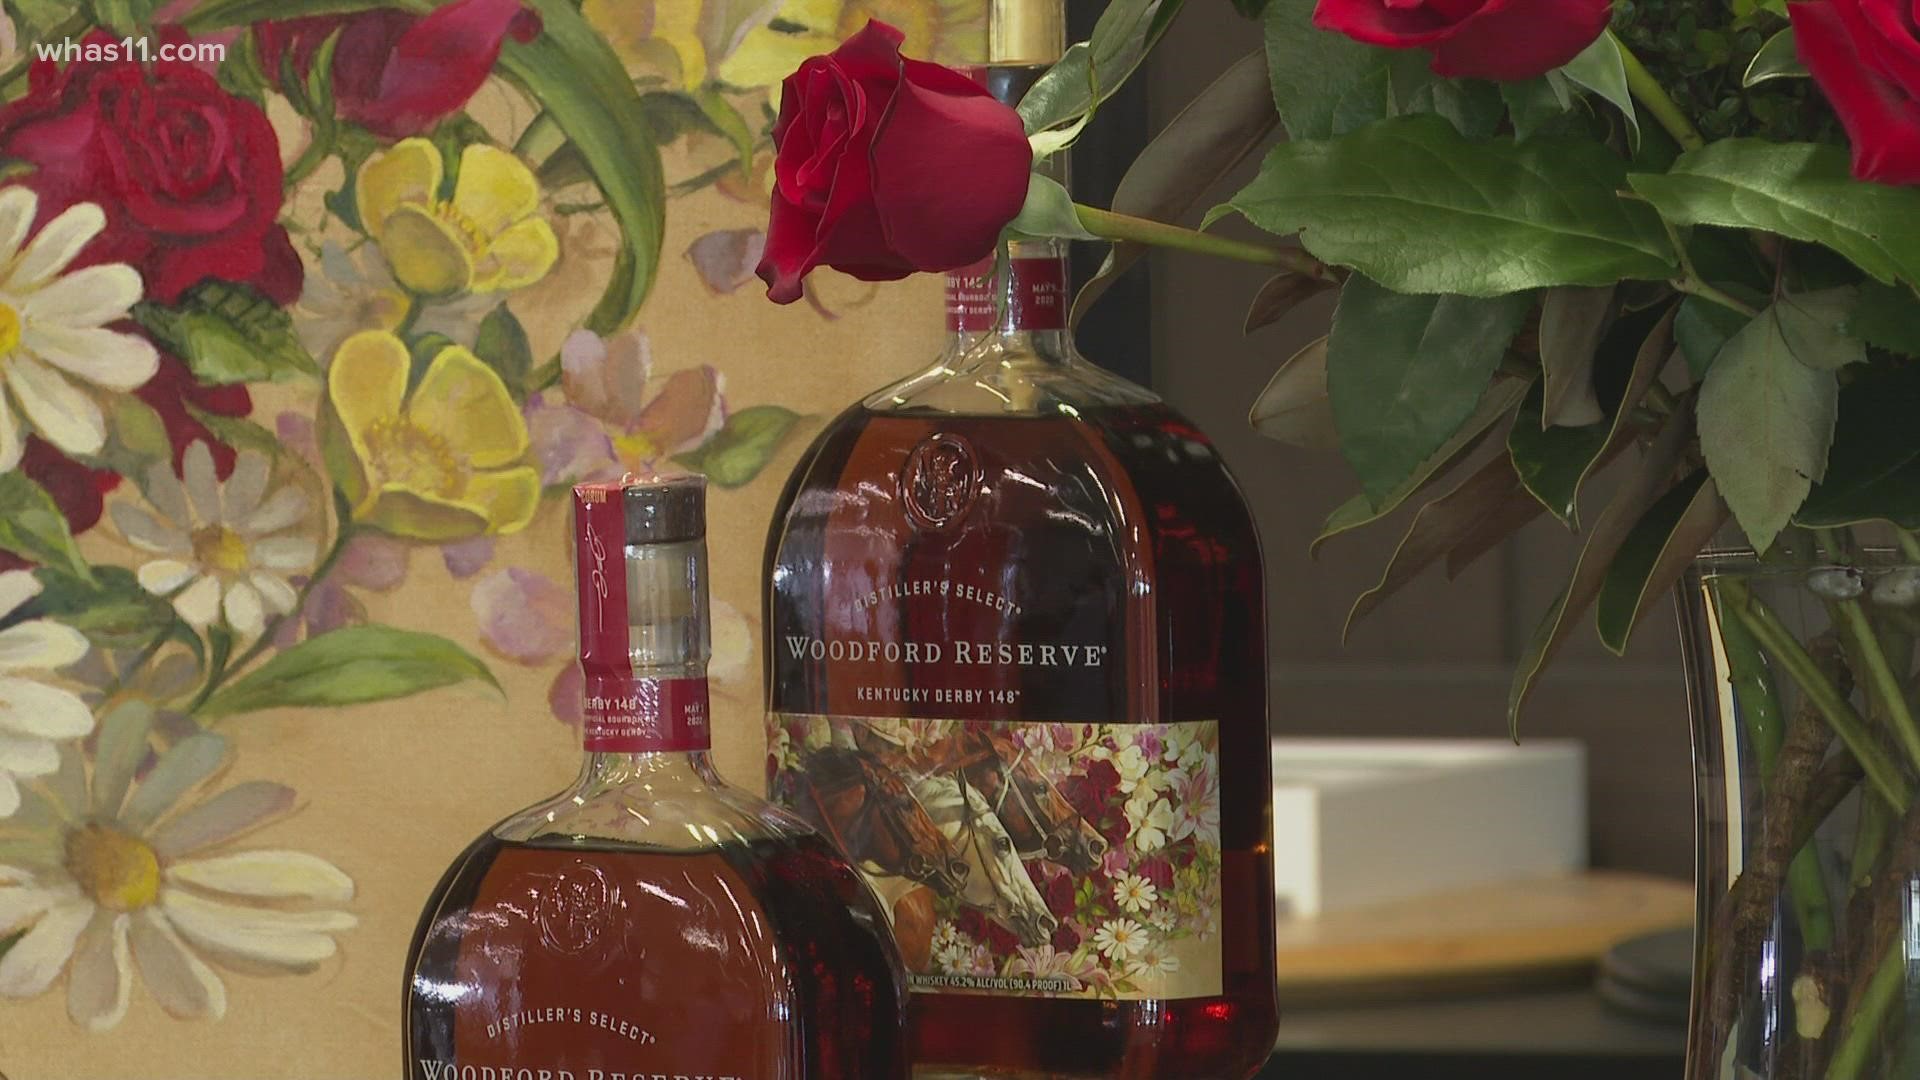 This is the 23rd Woodford Reserve Derby bottle. The bourbon will be for sale across the United States leading up to the big race.